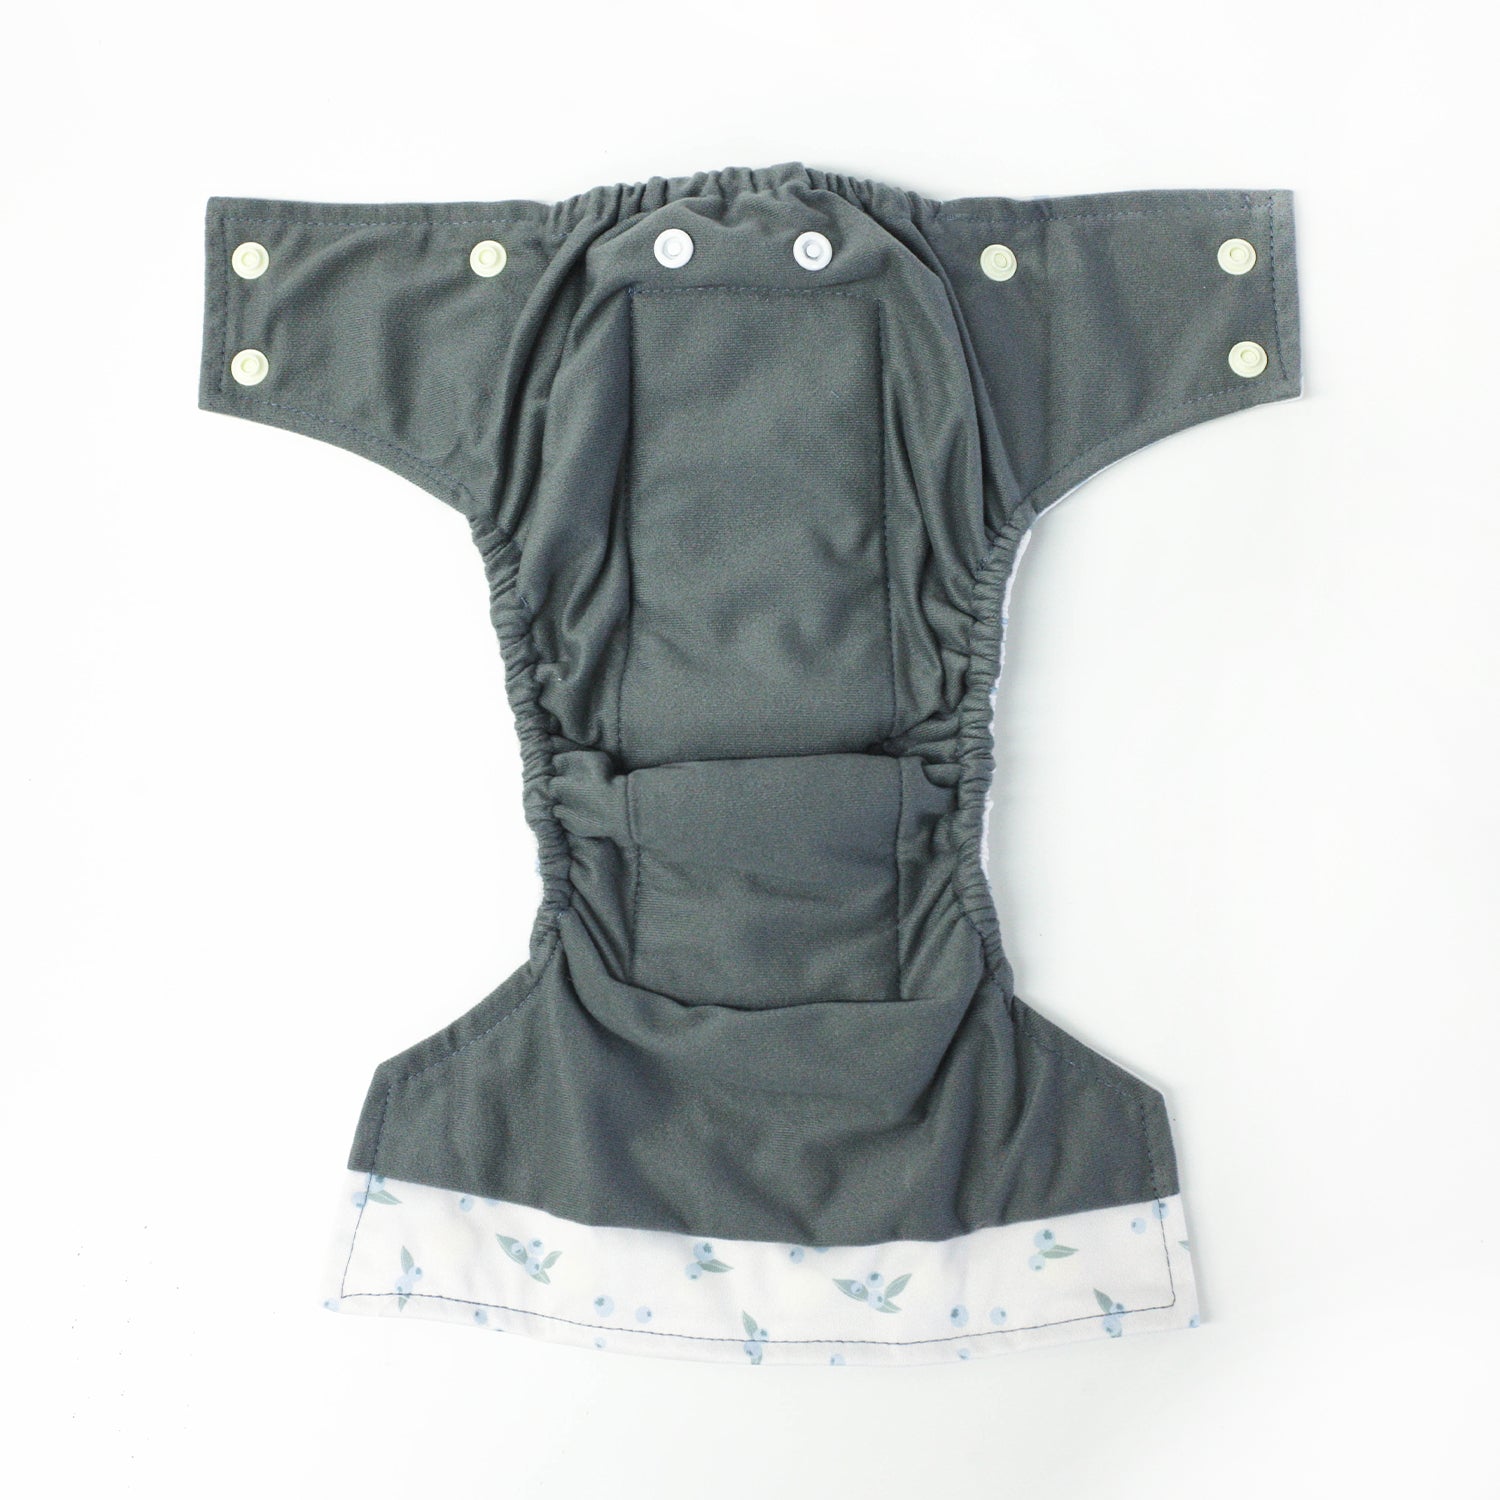 la petite ourse baby cloth diapers